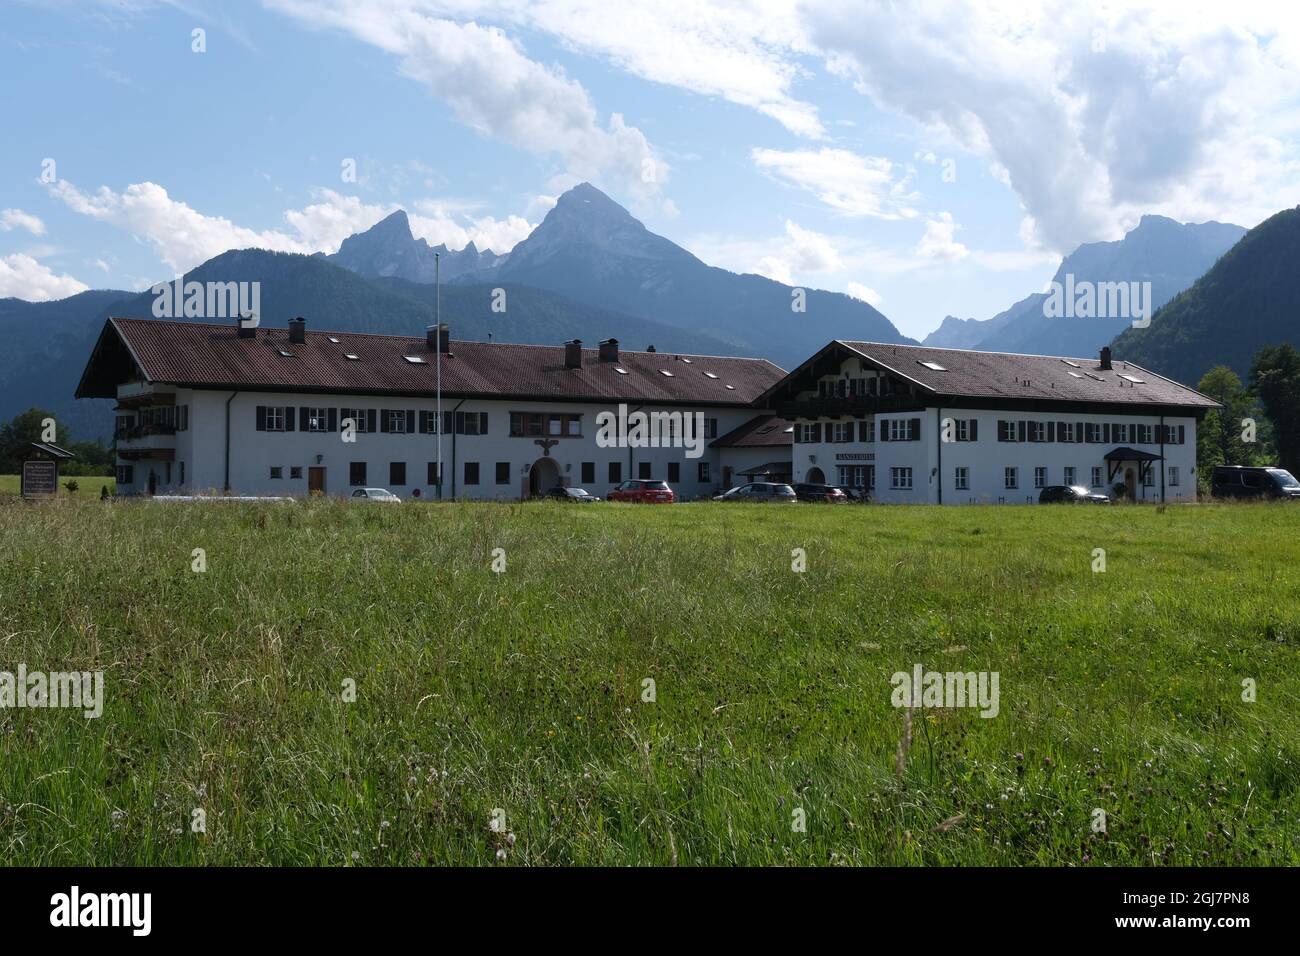 Berchtesgaden, Germany - August 10, 2021: What remains of the Reich Chancellor in the Obersalzberg. Eagle symbol on the wall. Sunny summer day Stock Photo